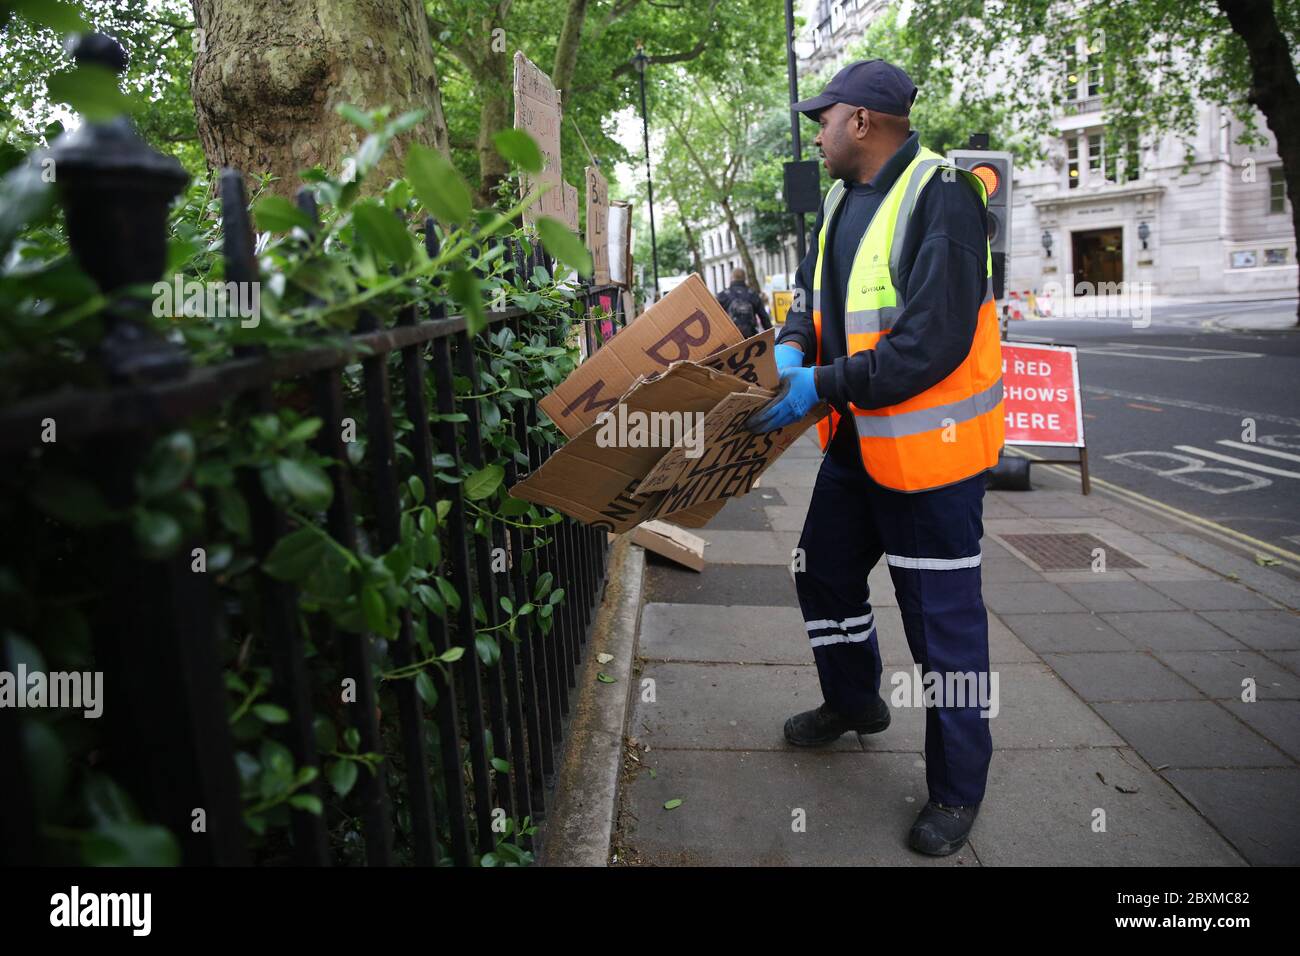 A worker collects discarded placards from Victoria Tower Gardens in Westminster, London, following a Black Lives Matter protest at the weekend. A raft of protests across the UK were sparked by the death of George Floyd, who was killed on May 25 while in police custody in the US city of Minneapolis. Stock Photo